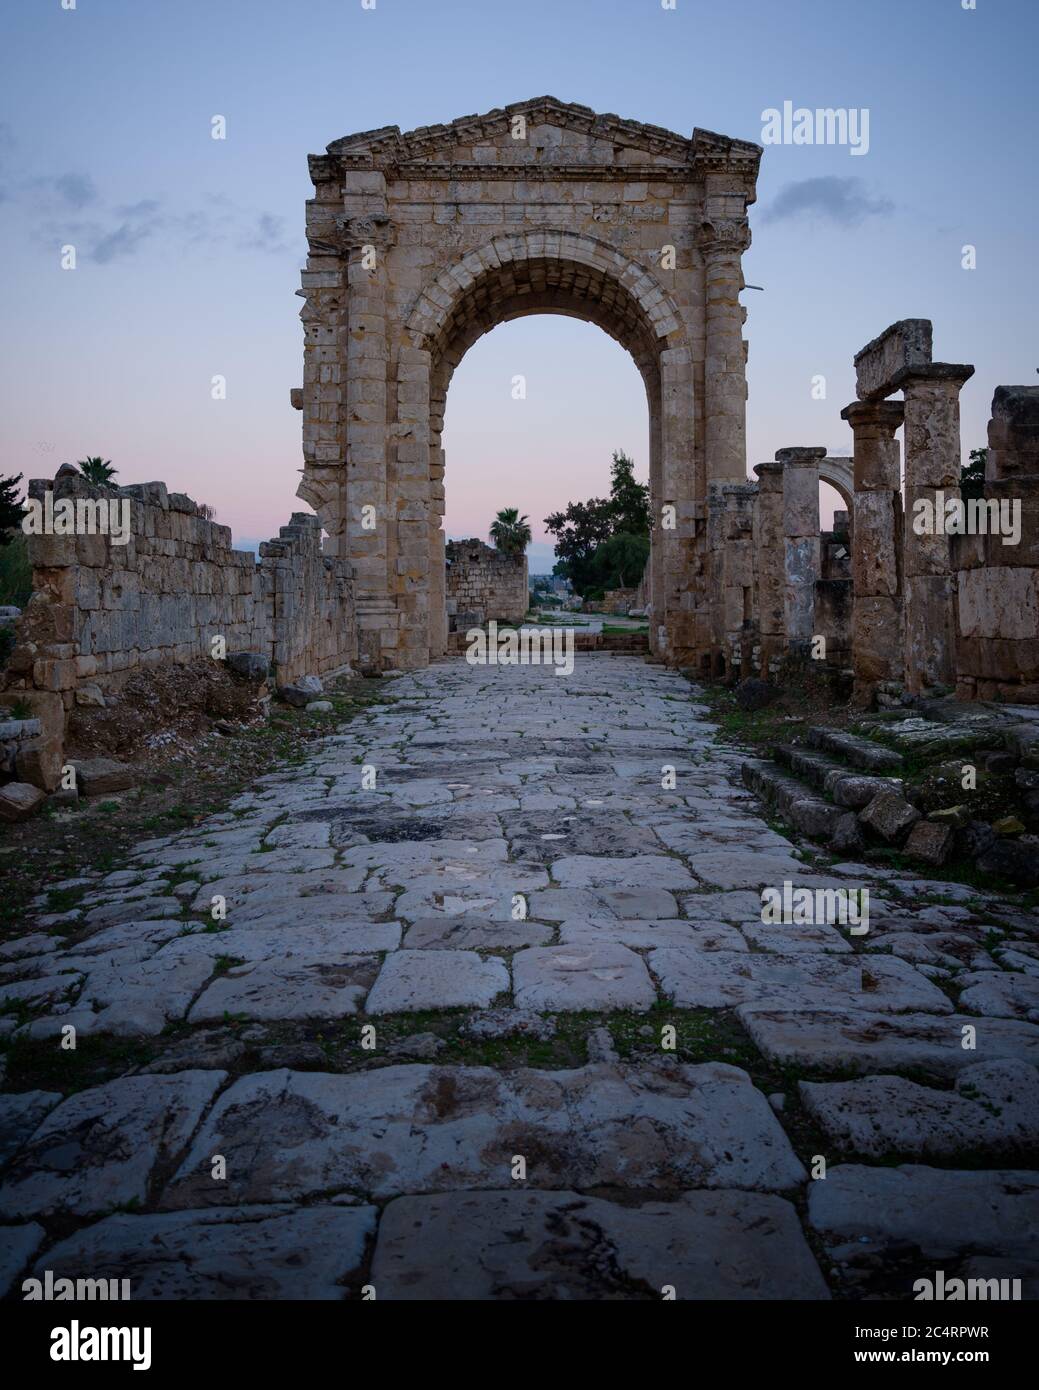 Monumental triumphal arch gate in Tyre Roman hippodrome, with ancient paving stone way leading through ruined columns and buildings, Lebanon, Middle E Stock Photo